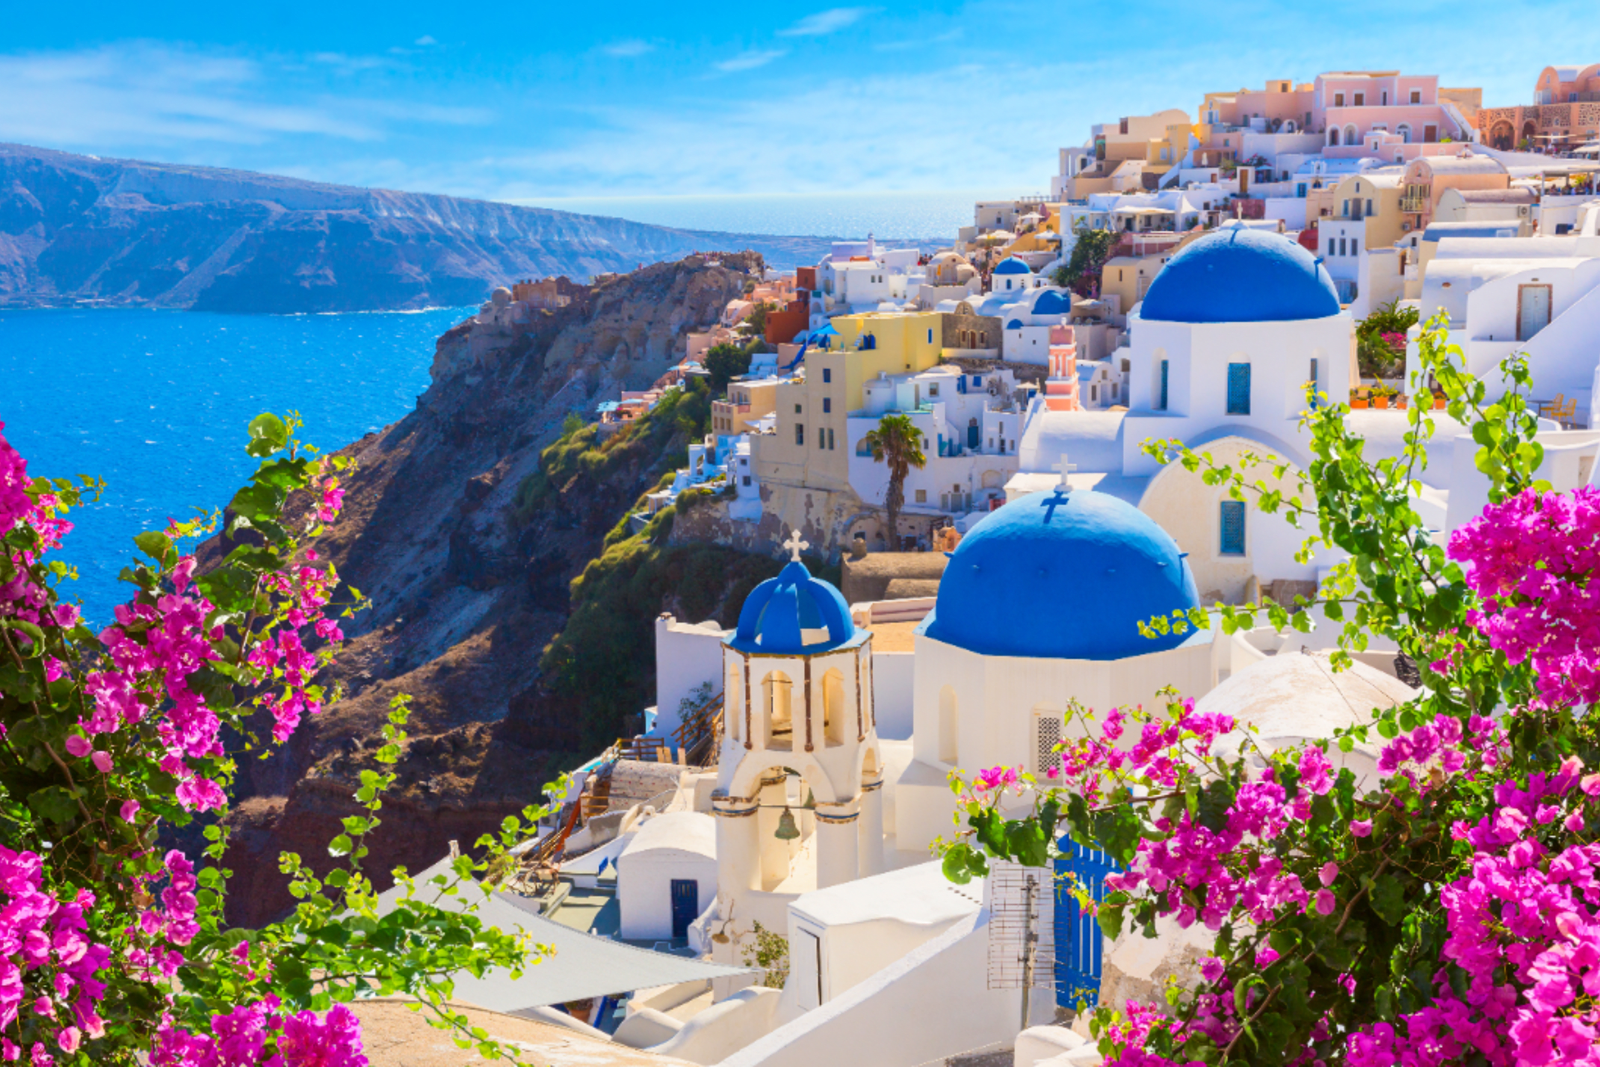 Blue-domed houses in Greece